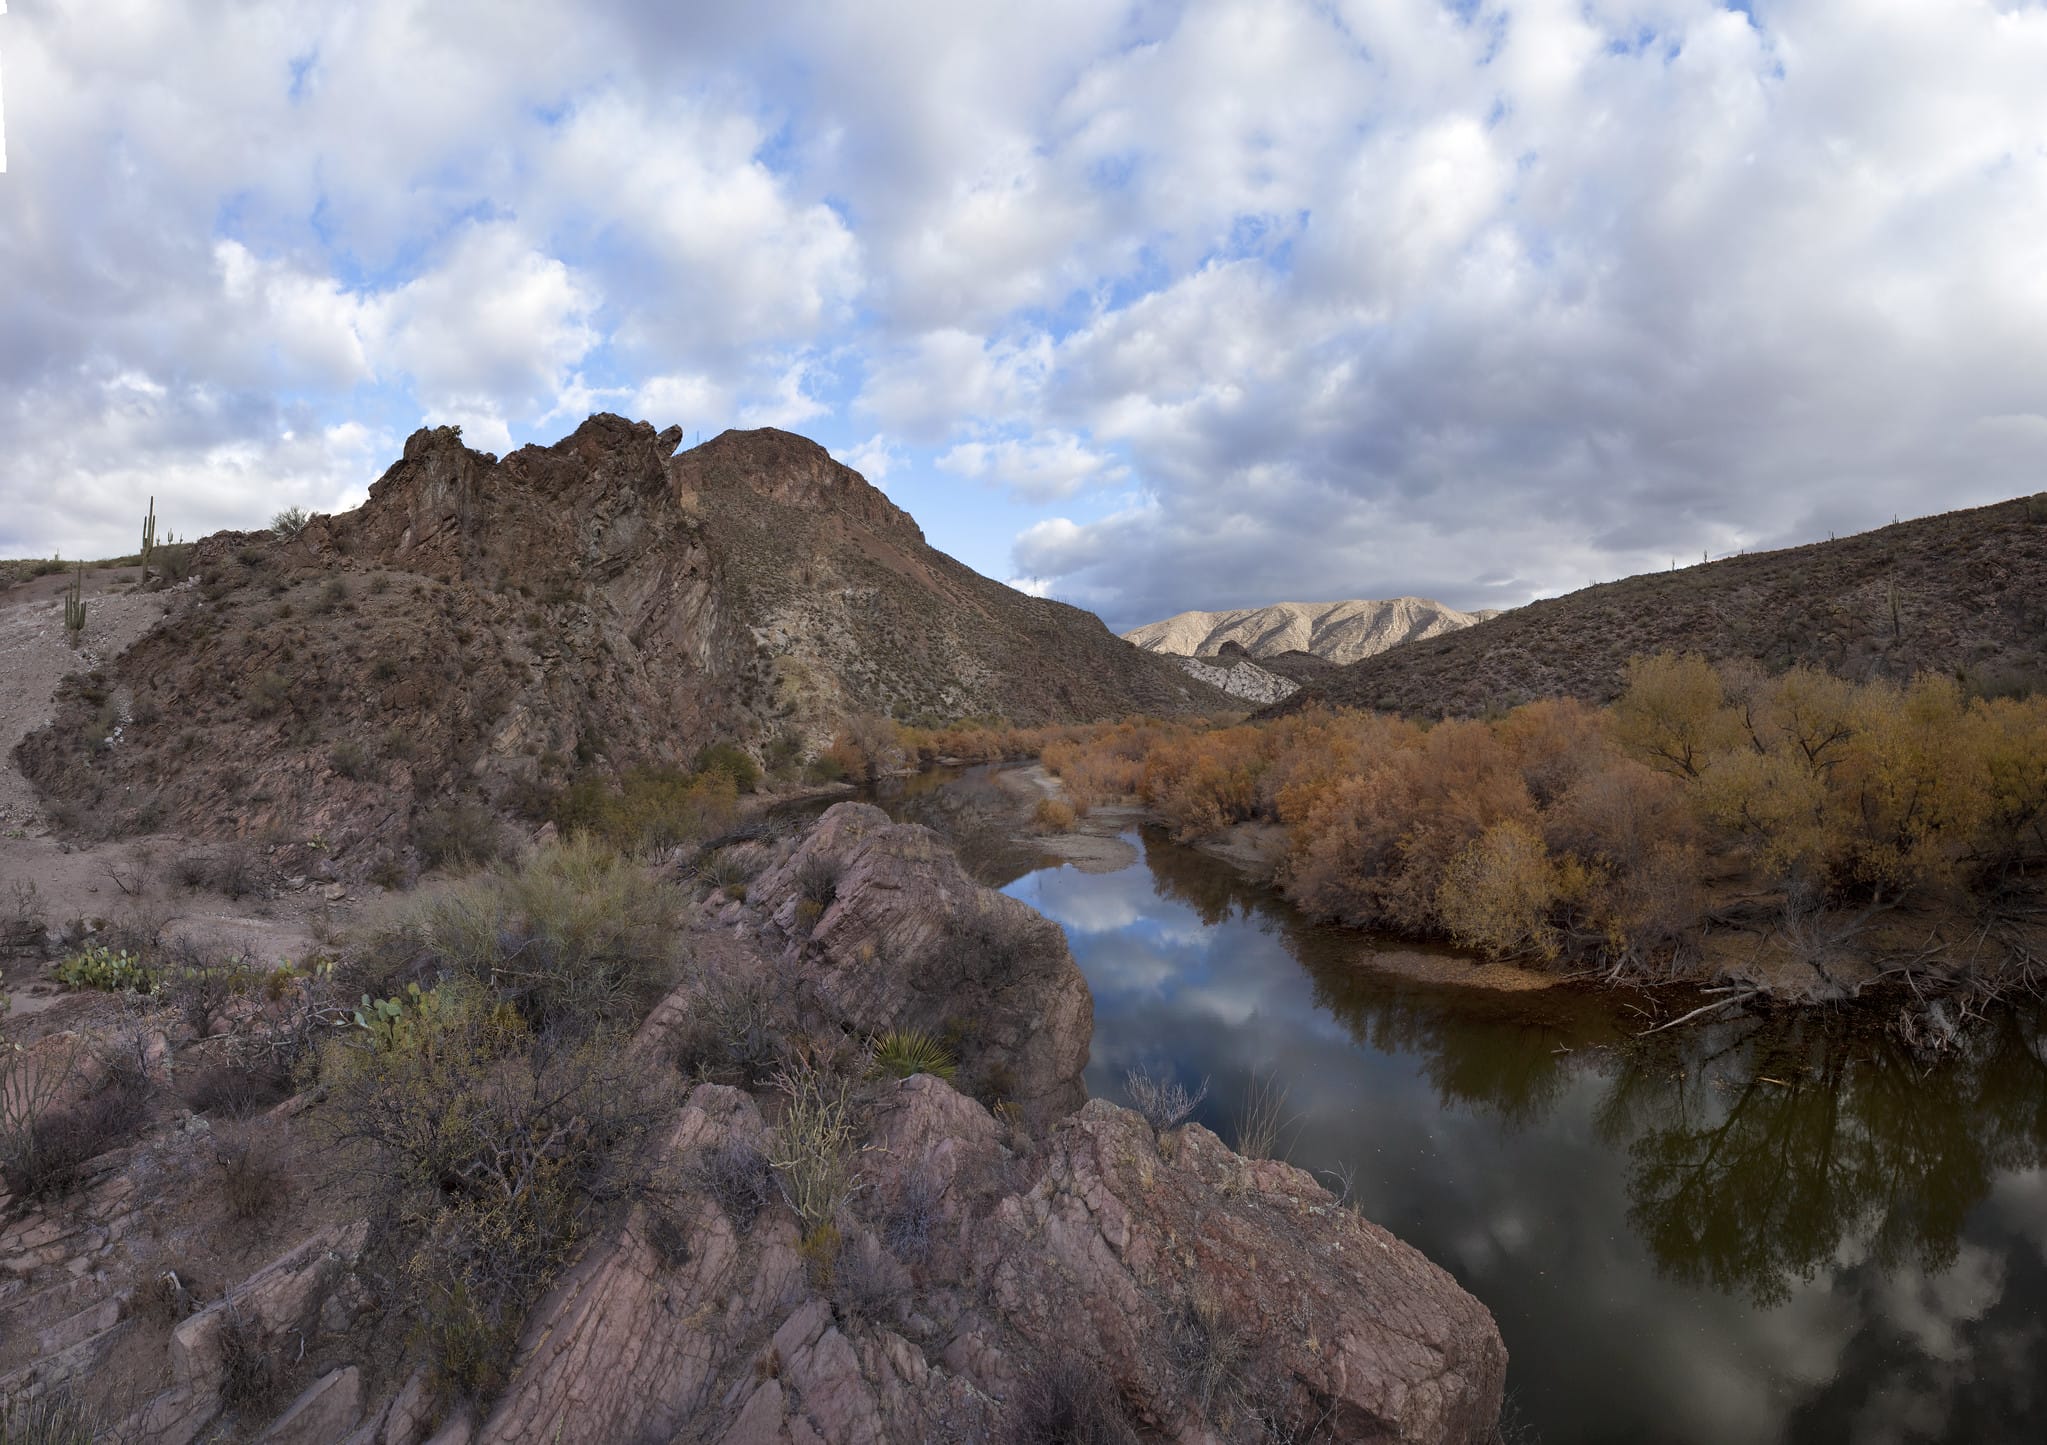 The Gila River just downstream from Coolidge Dam in Arizona.